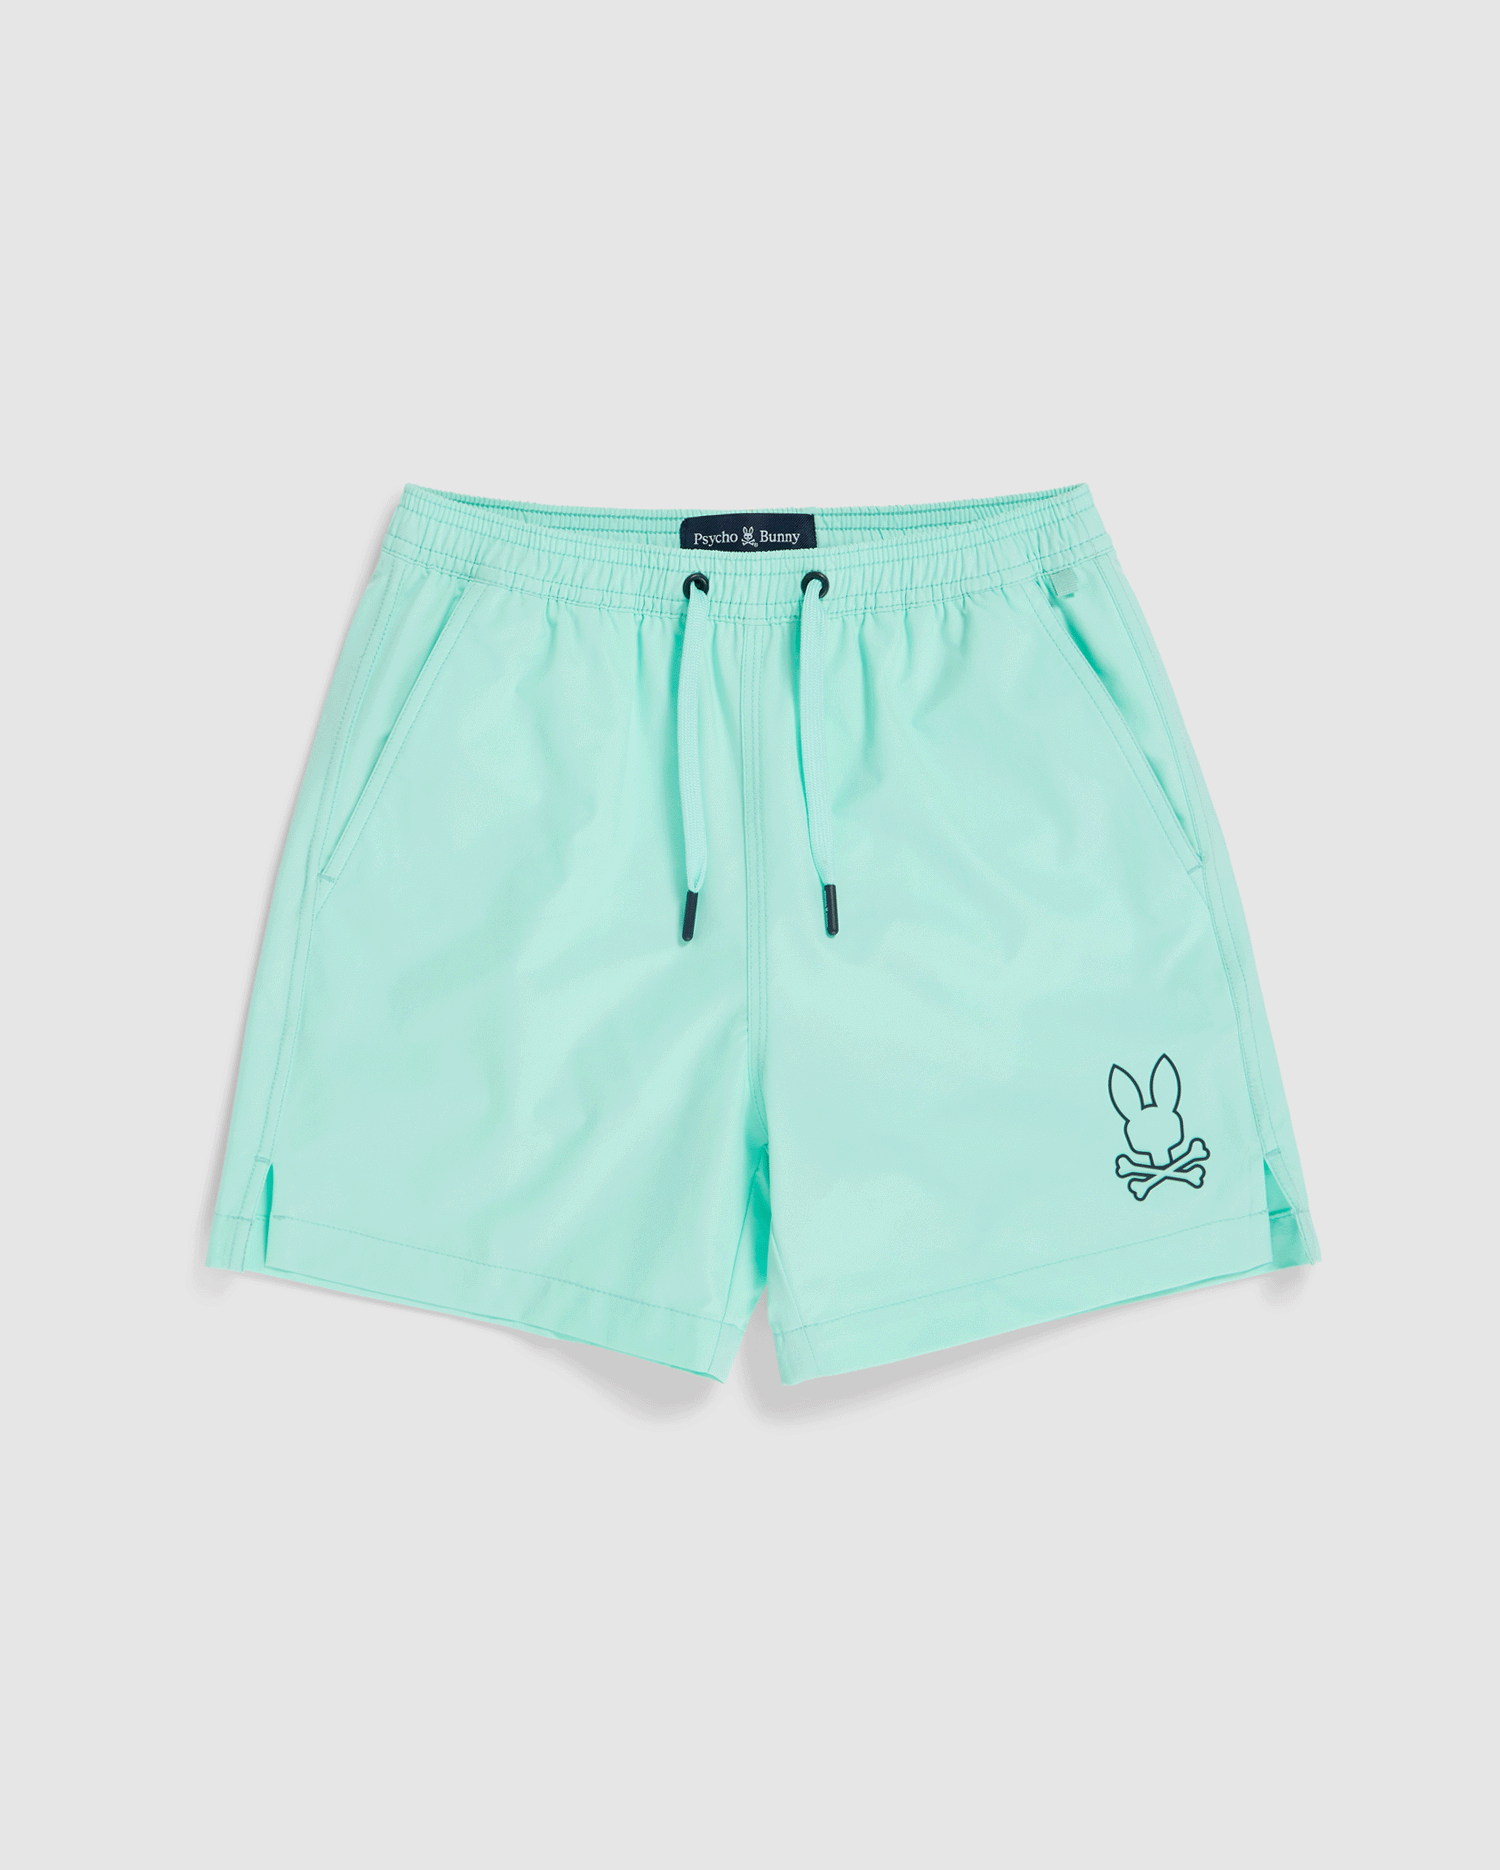 A pair of light turquoise, quick-dry KIDS PARKER HYDROCHROMIC SWIM TRUNK - B0W646C200 by Psycho Bunny with a black drawstring. The shorts feature two side pockets and a small embroidered bunny and crossbones logo in black near the bottom hem on one leg.